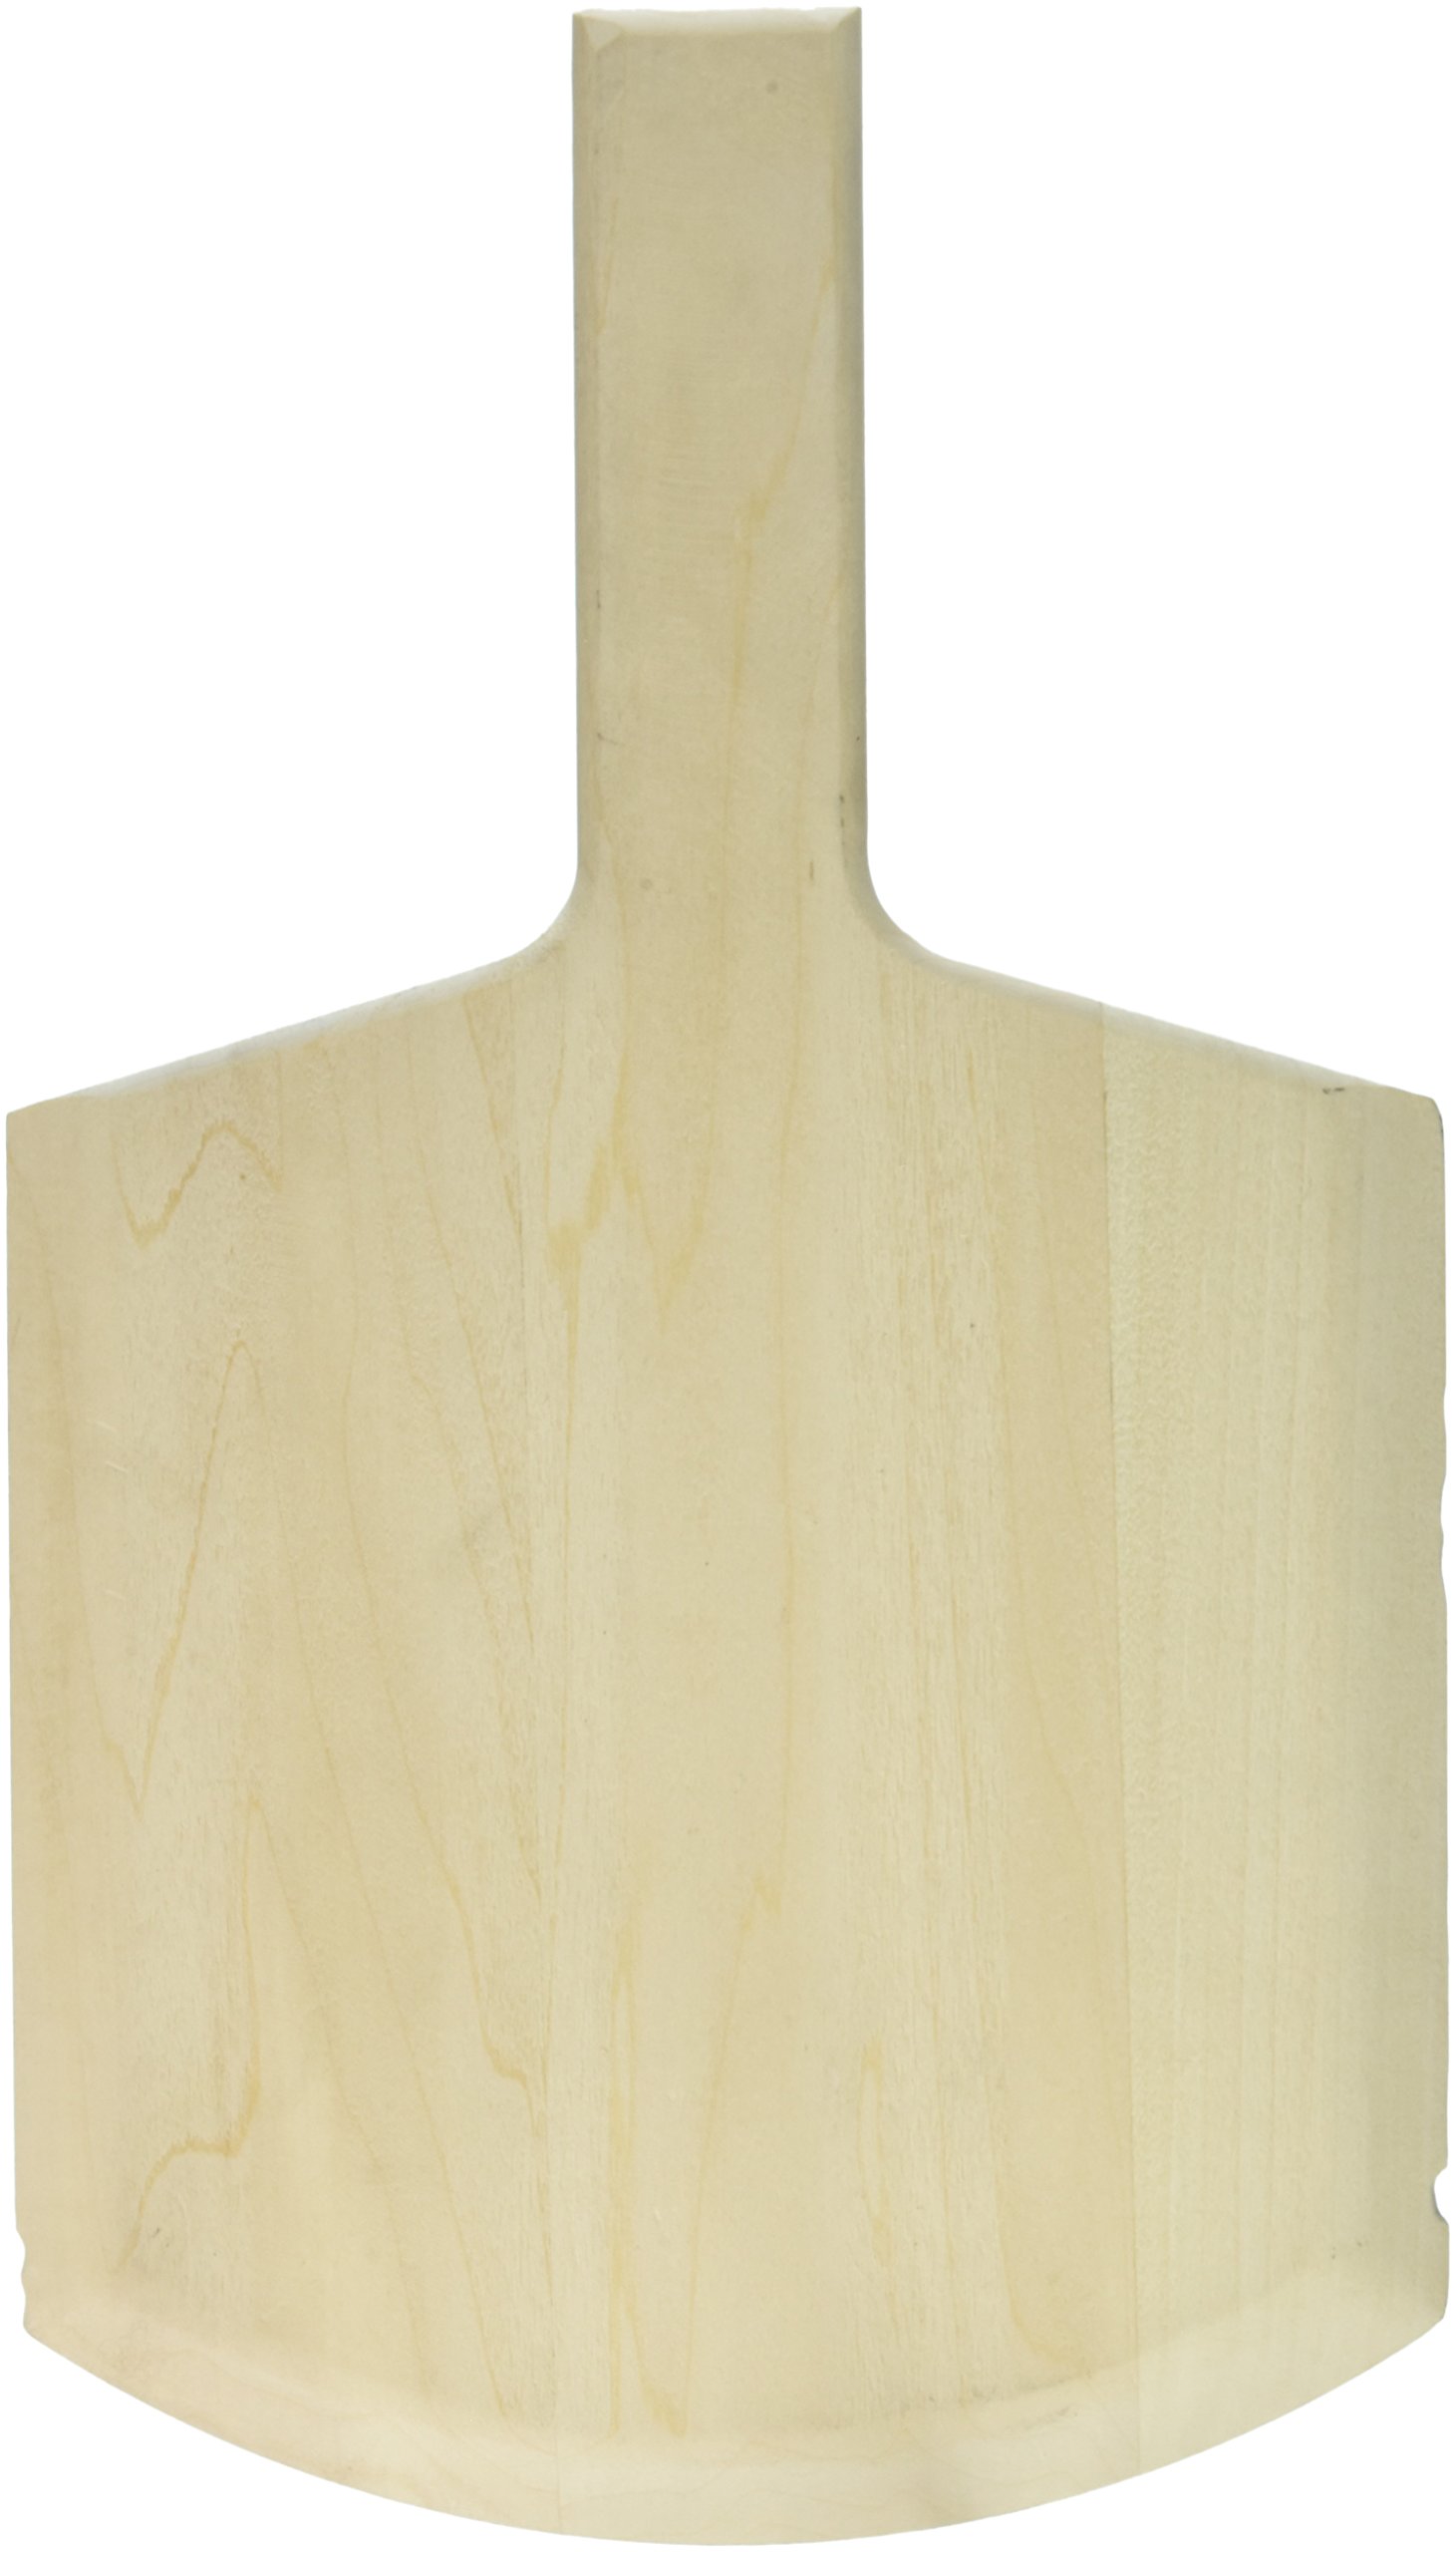 American METALCRAFT, Inc. American Metalcraft 814 Wooden Pizza Peel with Handle, 14" Overall, 8"W x 9"L Blade